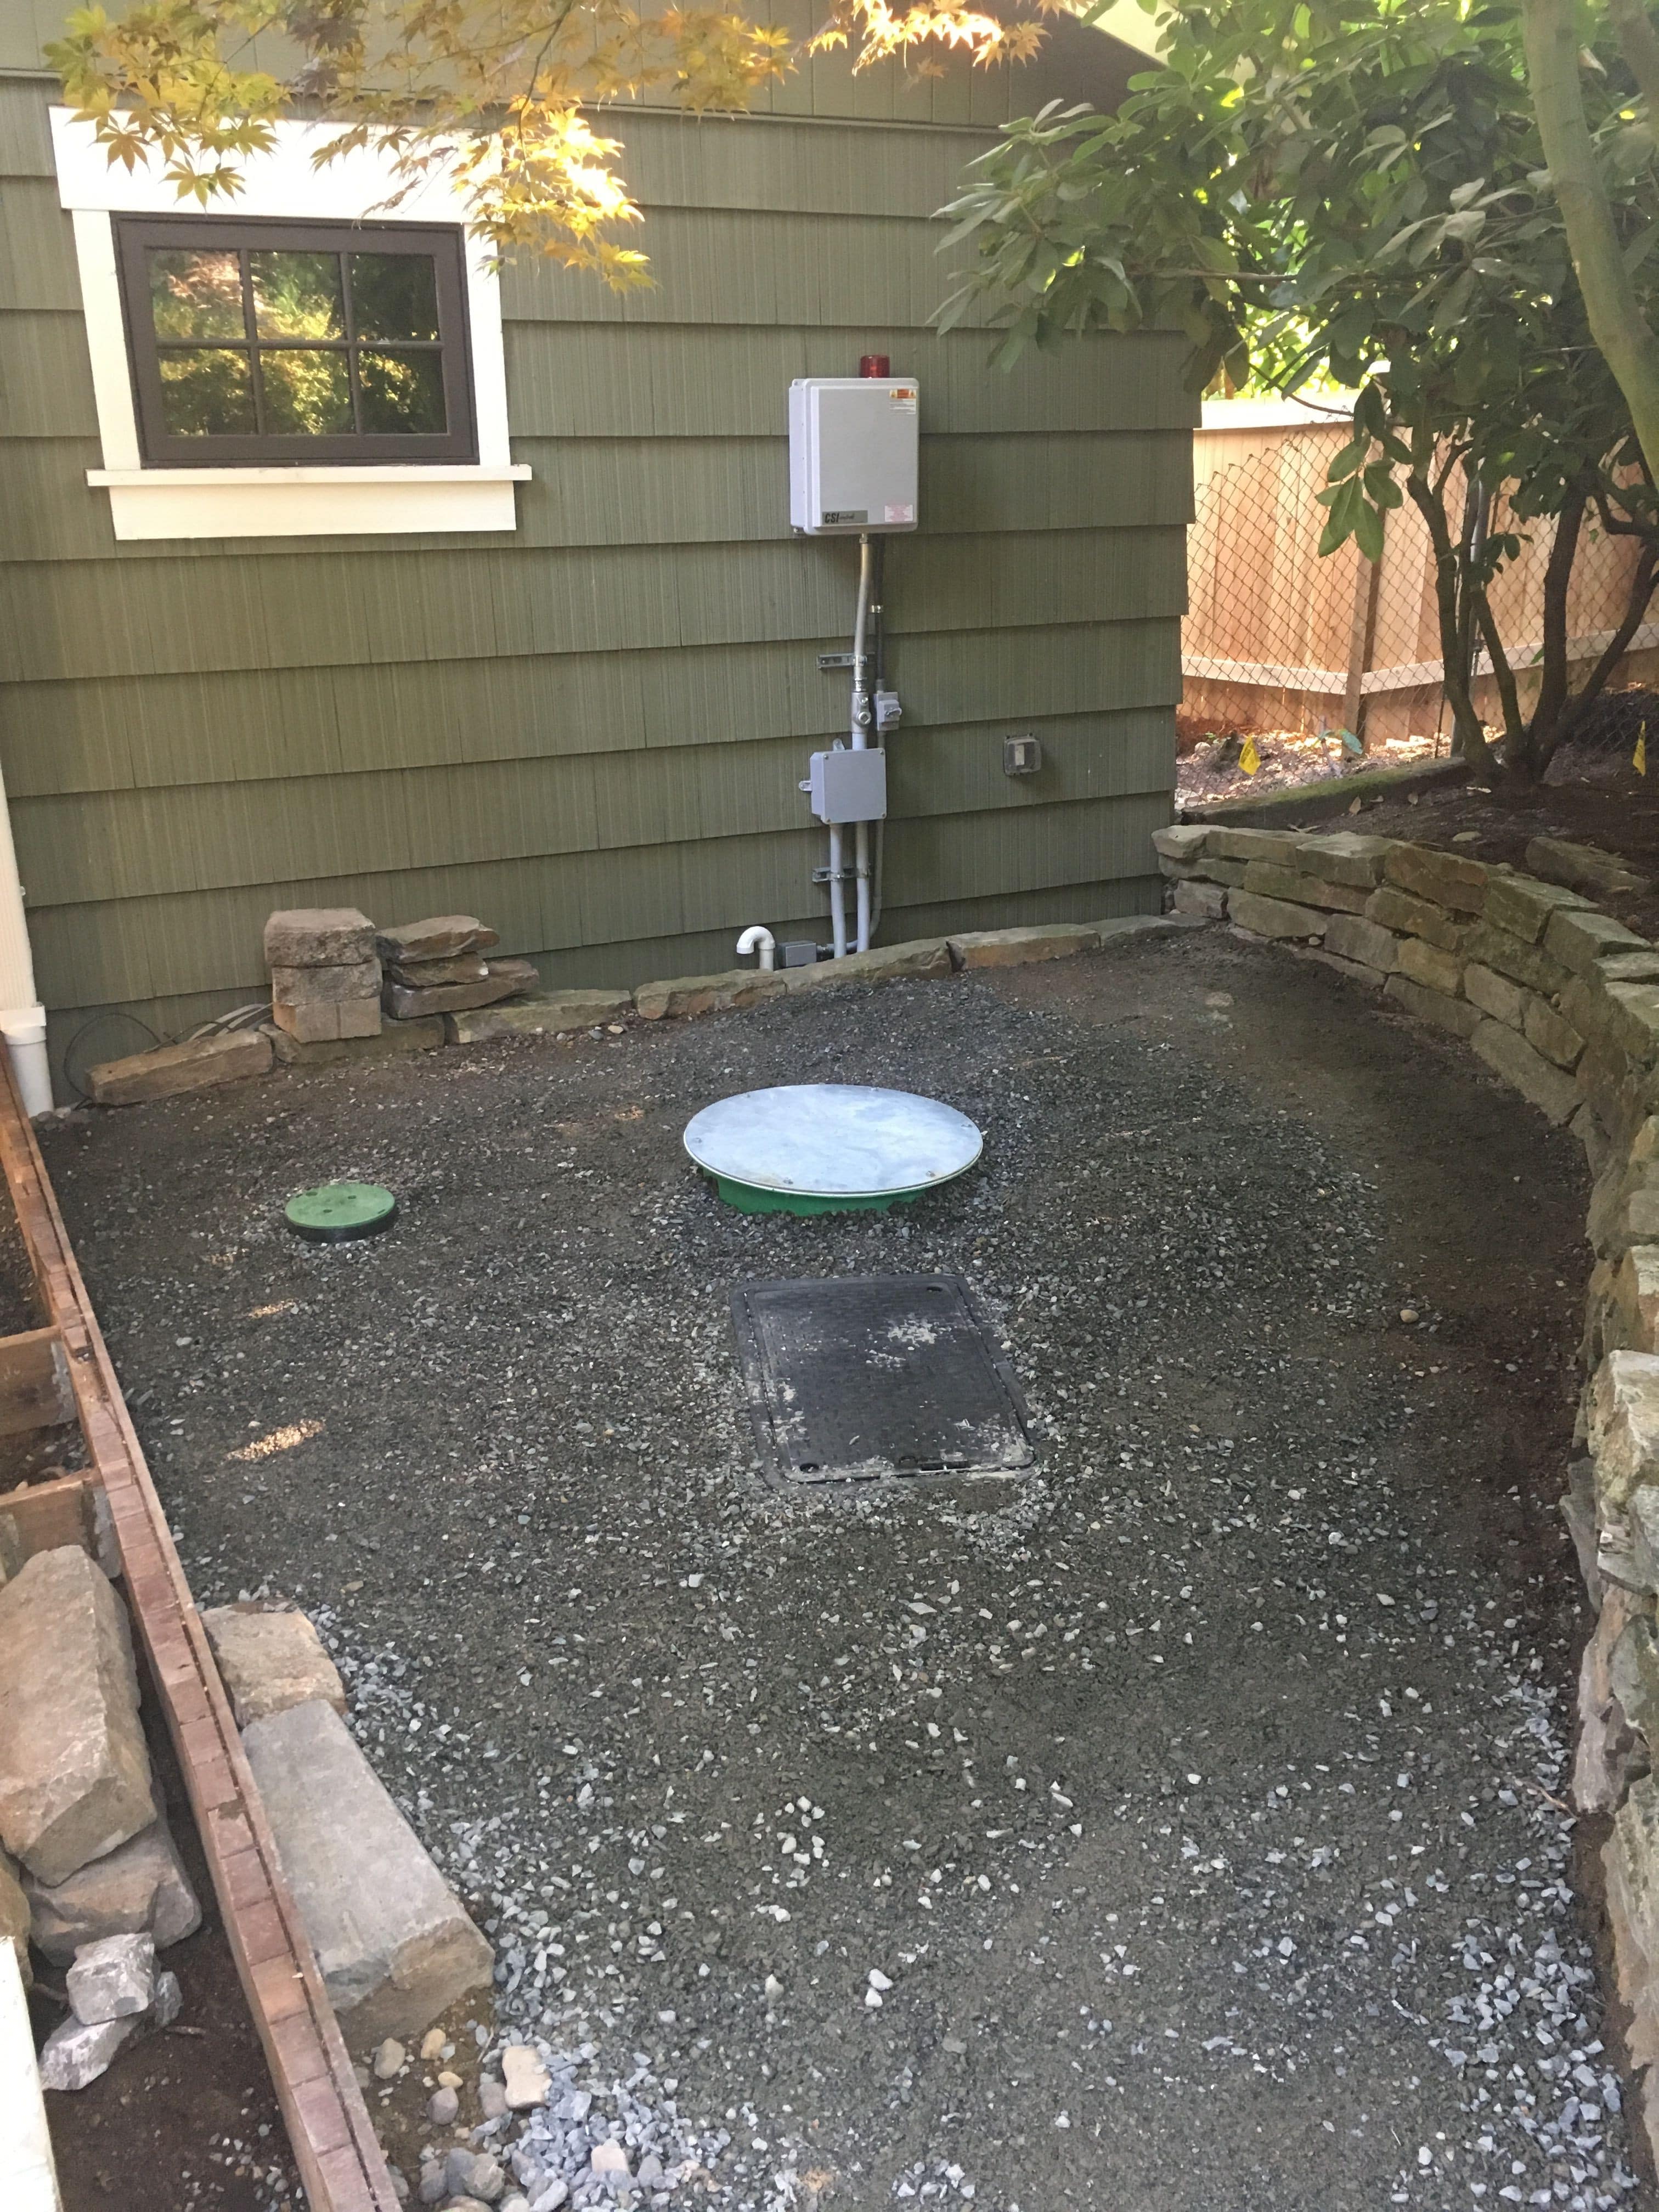 A 24" round top of sewer tank installed next to a rectangle plastic box housing the clean out for the pressure pump line and within a few feet of the house.